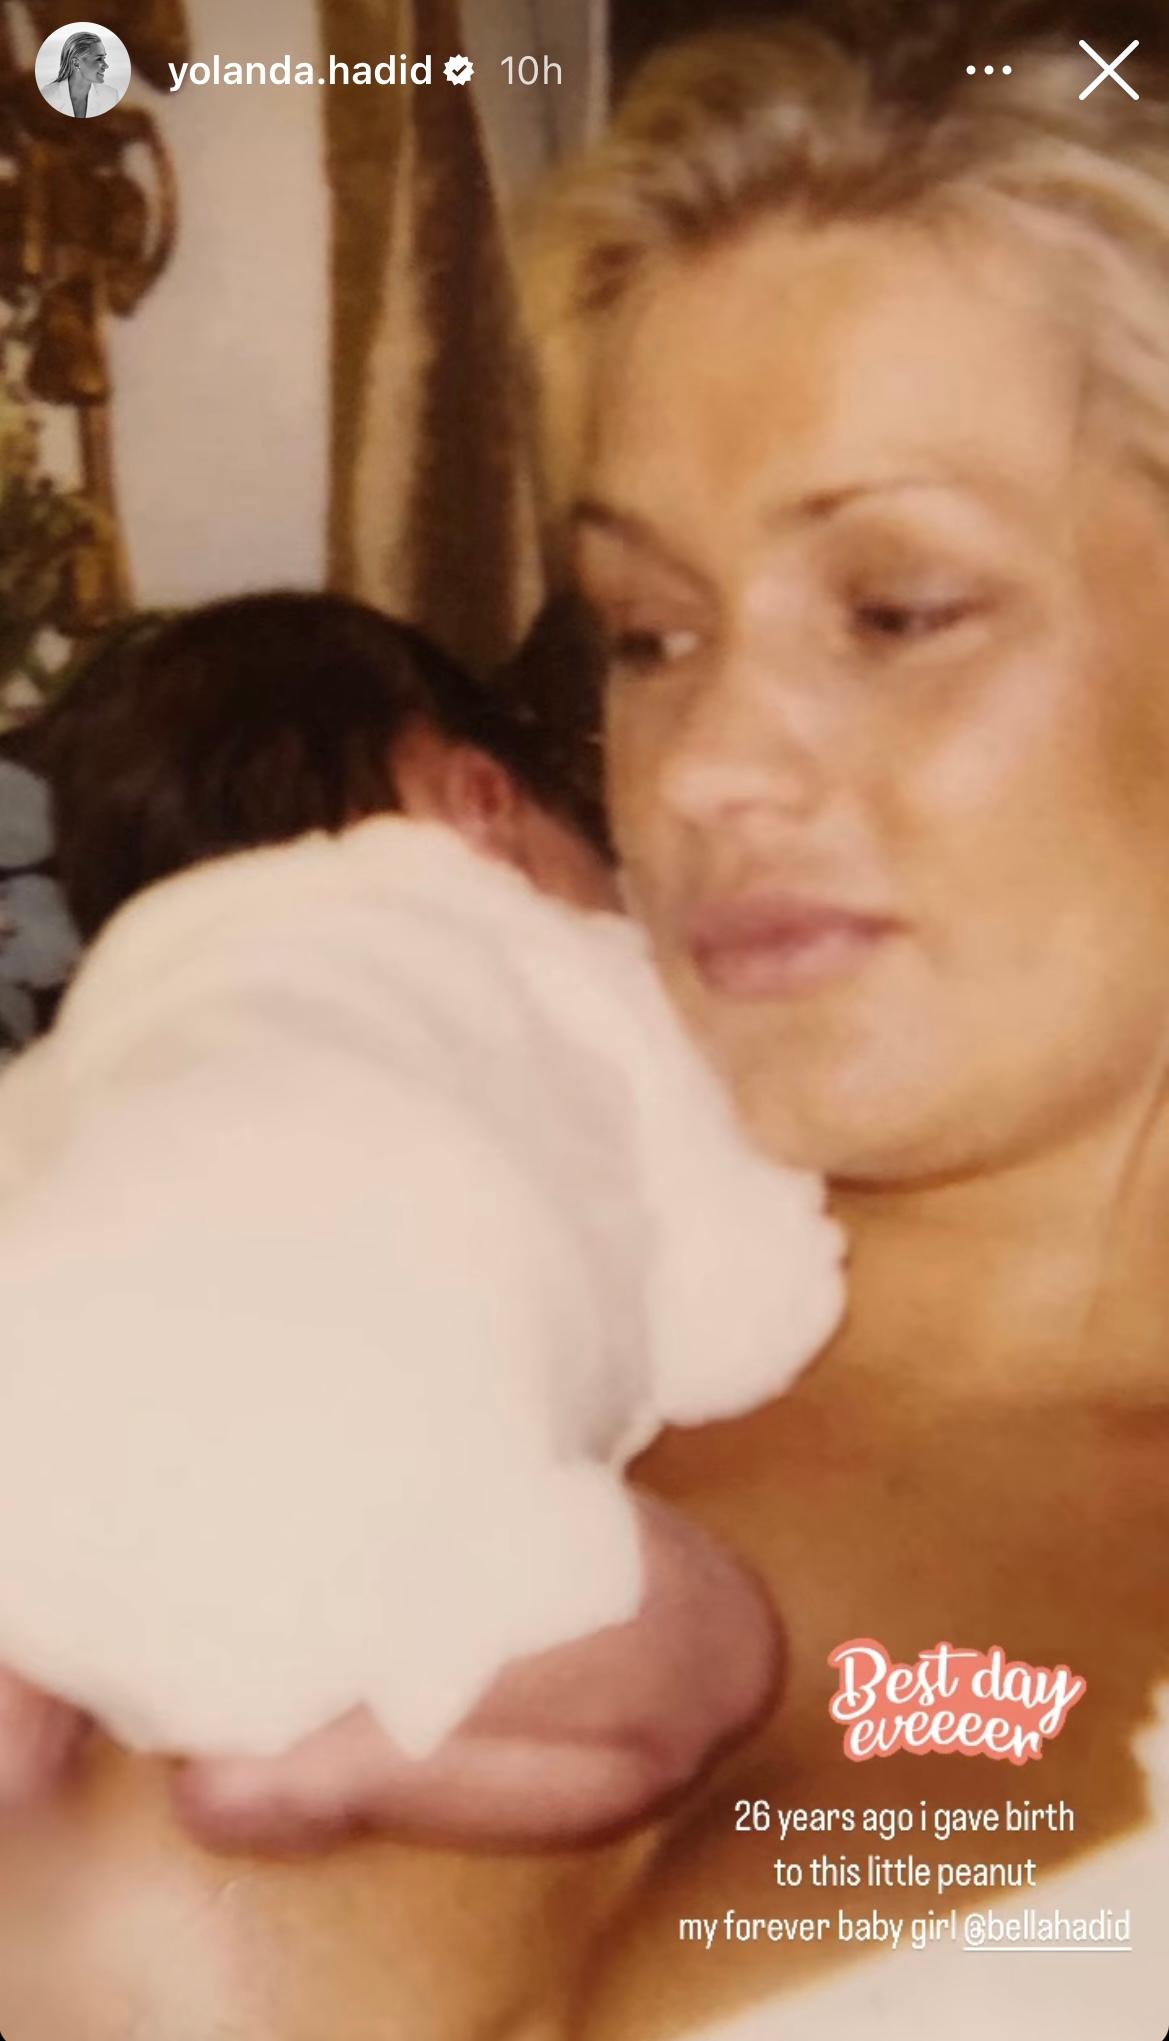 A throwback picture of Yolanda Hadid carrying a baby Bella Hadid